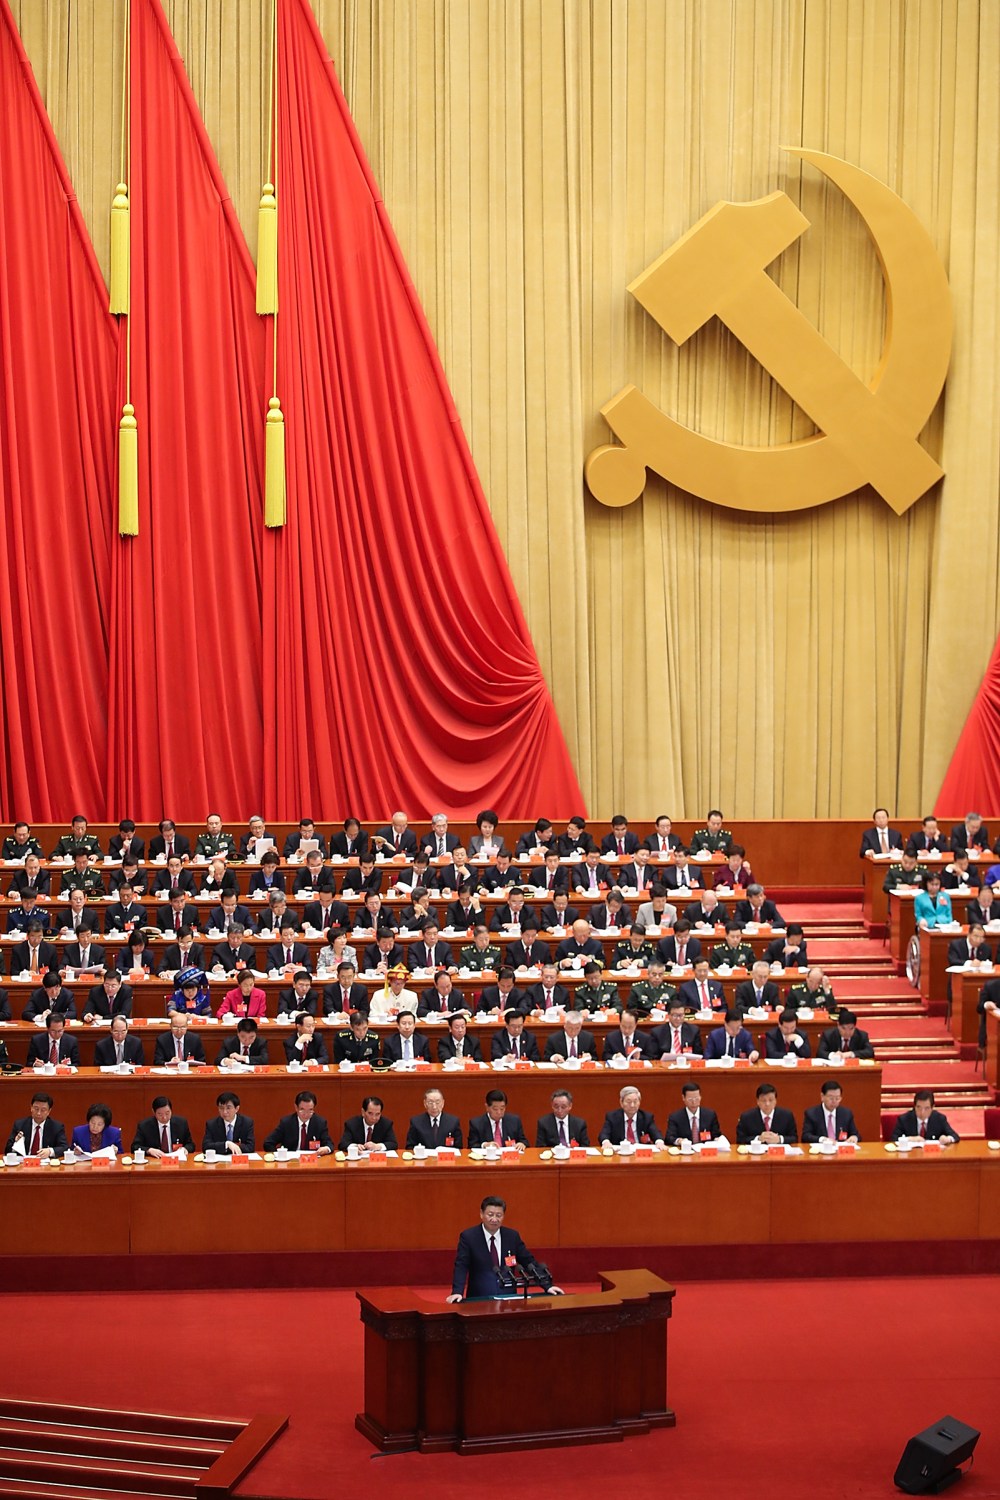 Chinese President Xi Jinping delivers a speech during the opening session of the 19th Communist Party Congress in Beijing on Oct. 18, 2017.